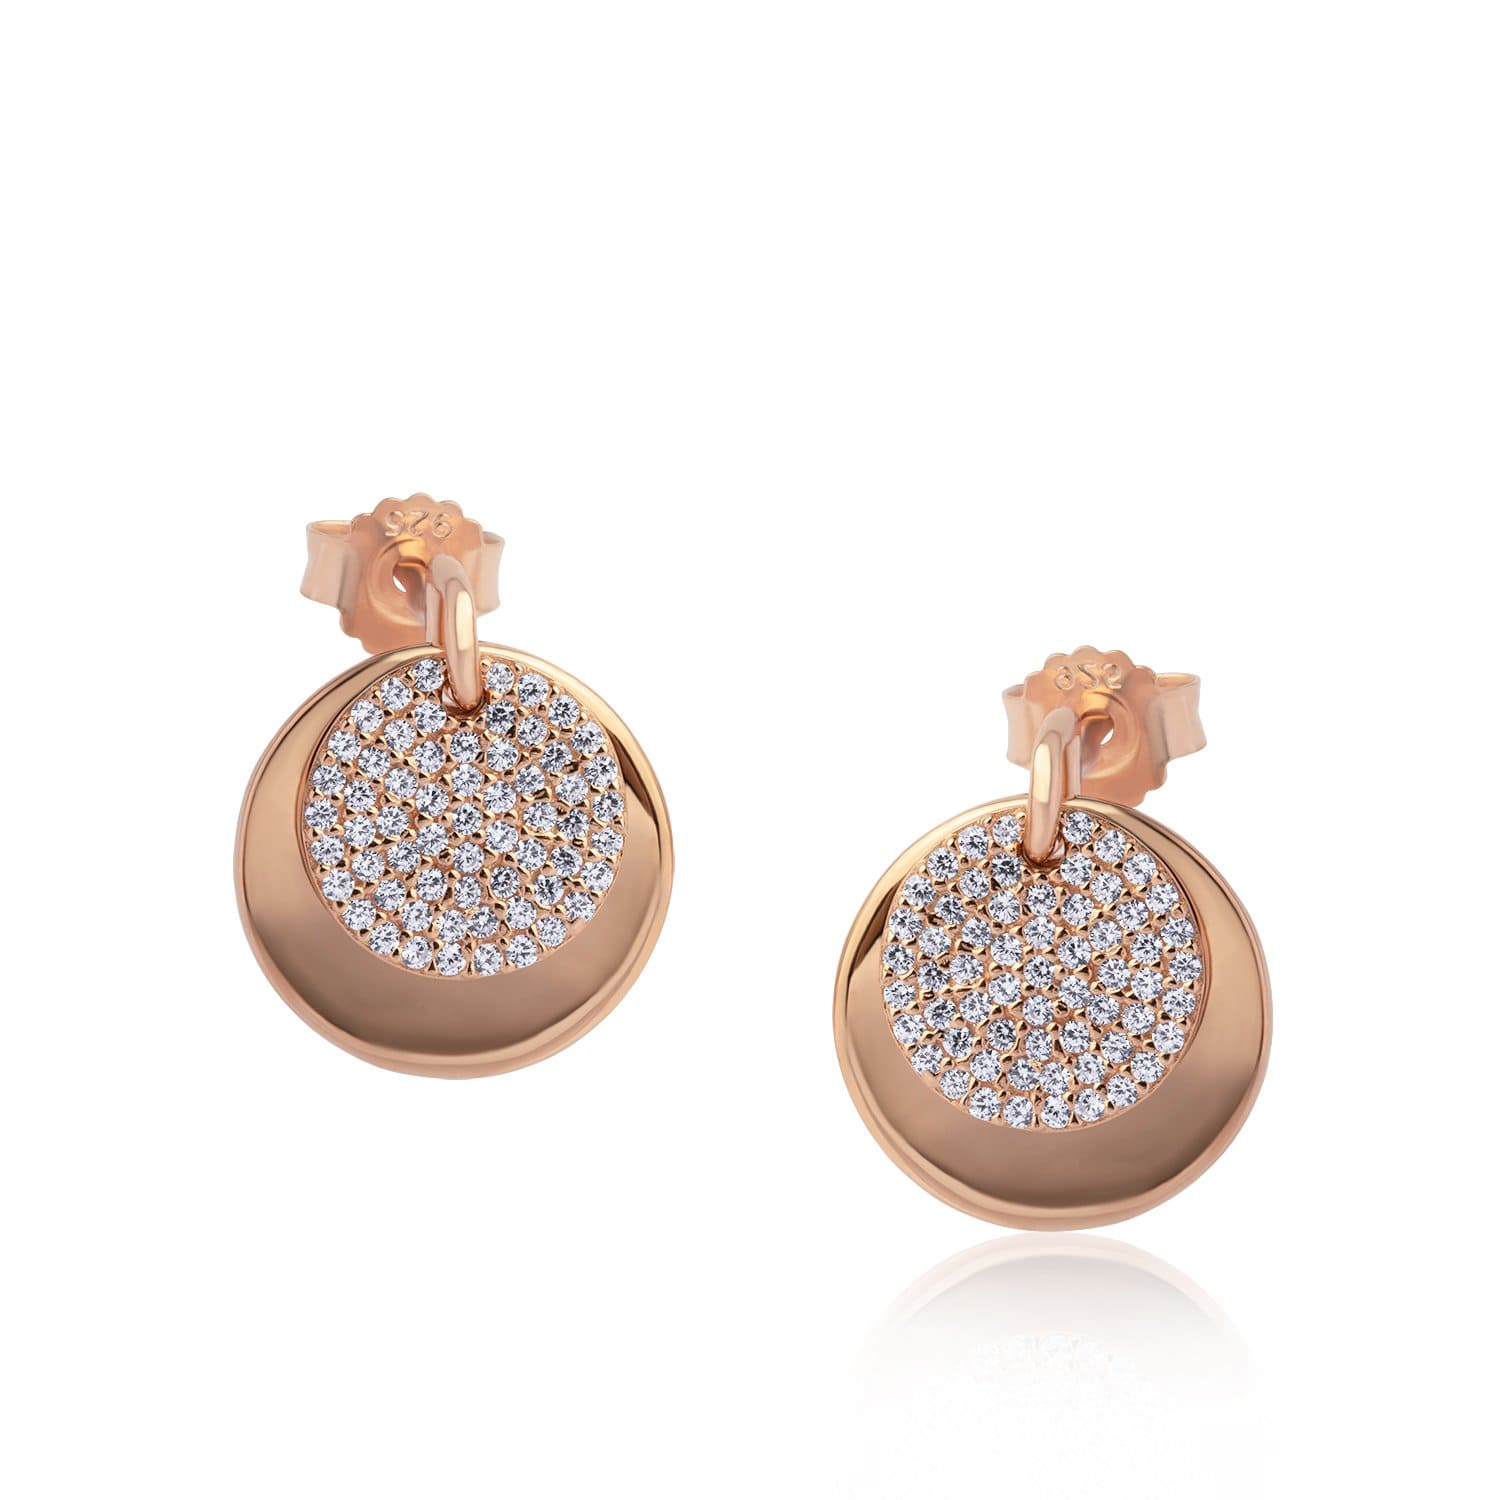 Lynora Jewellery Earring Rose Gold Plate Eclipse Earrings Rose Gold Plate